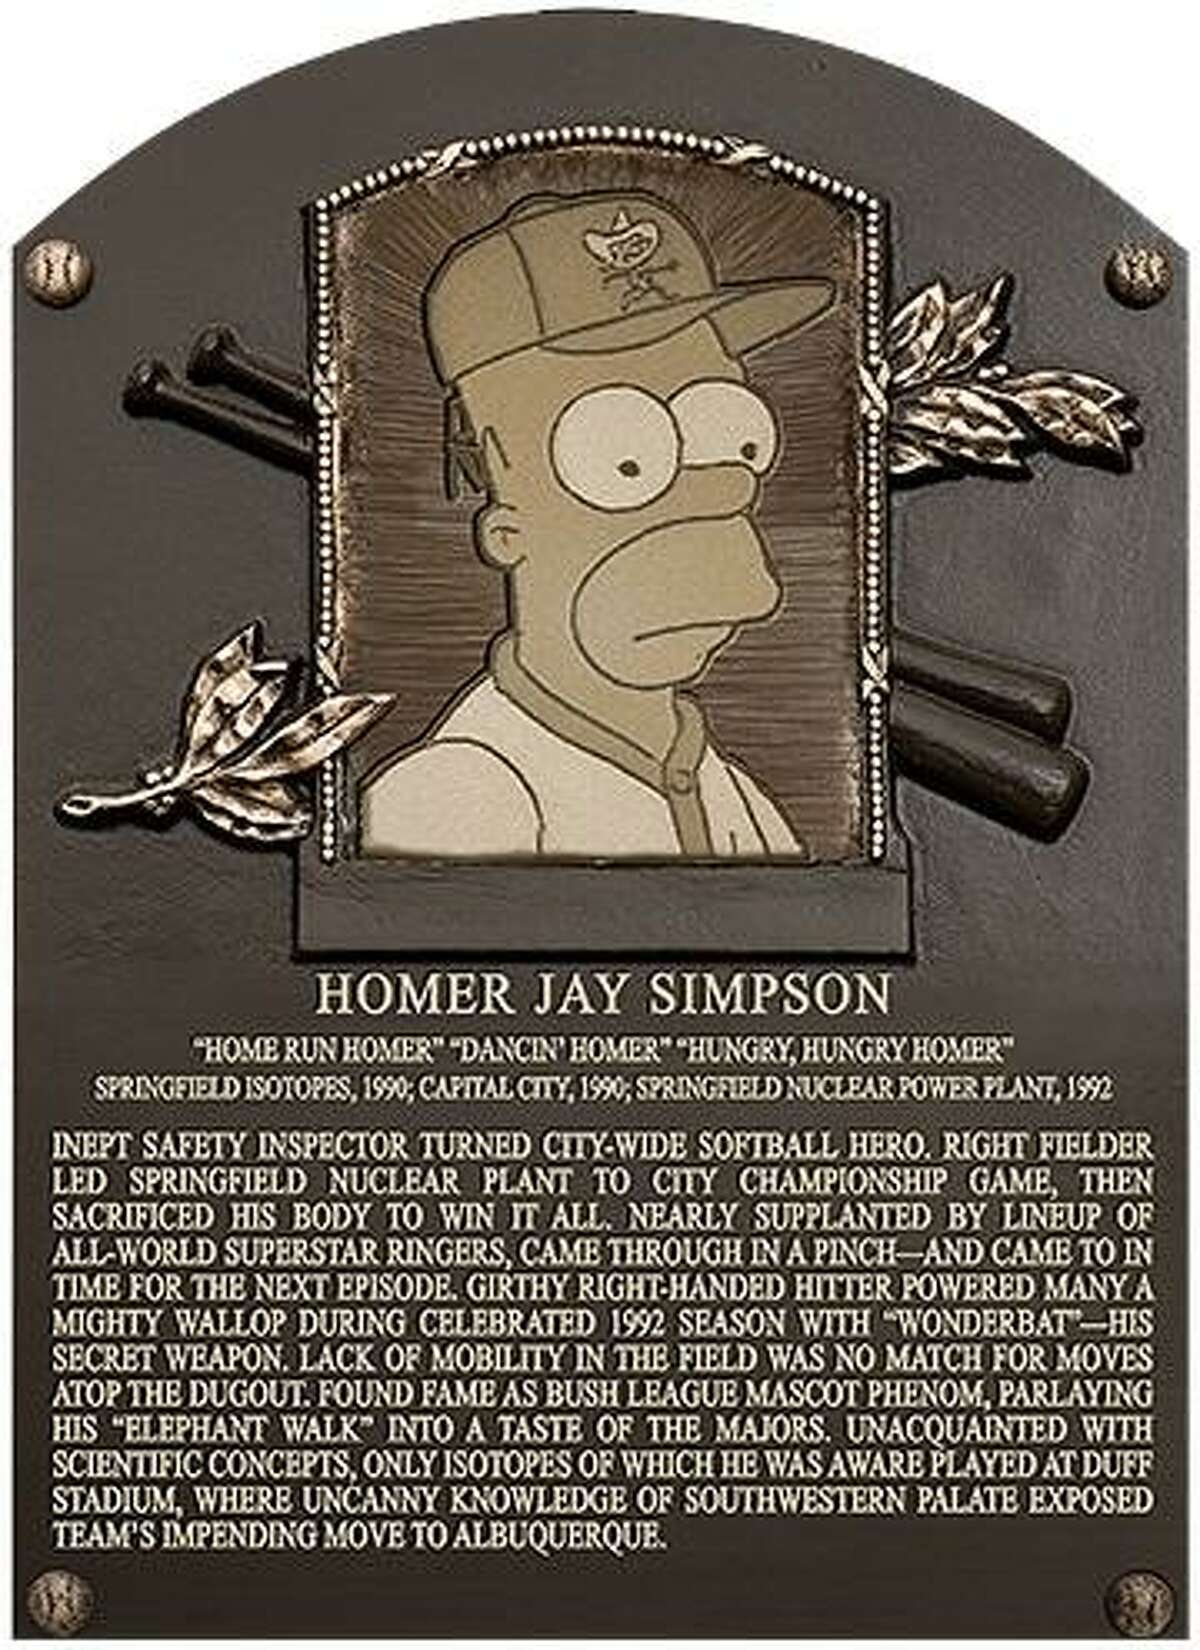 Simpsons' softball episode brings Homer to Hall of Fame, Local Sports